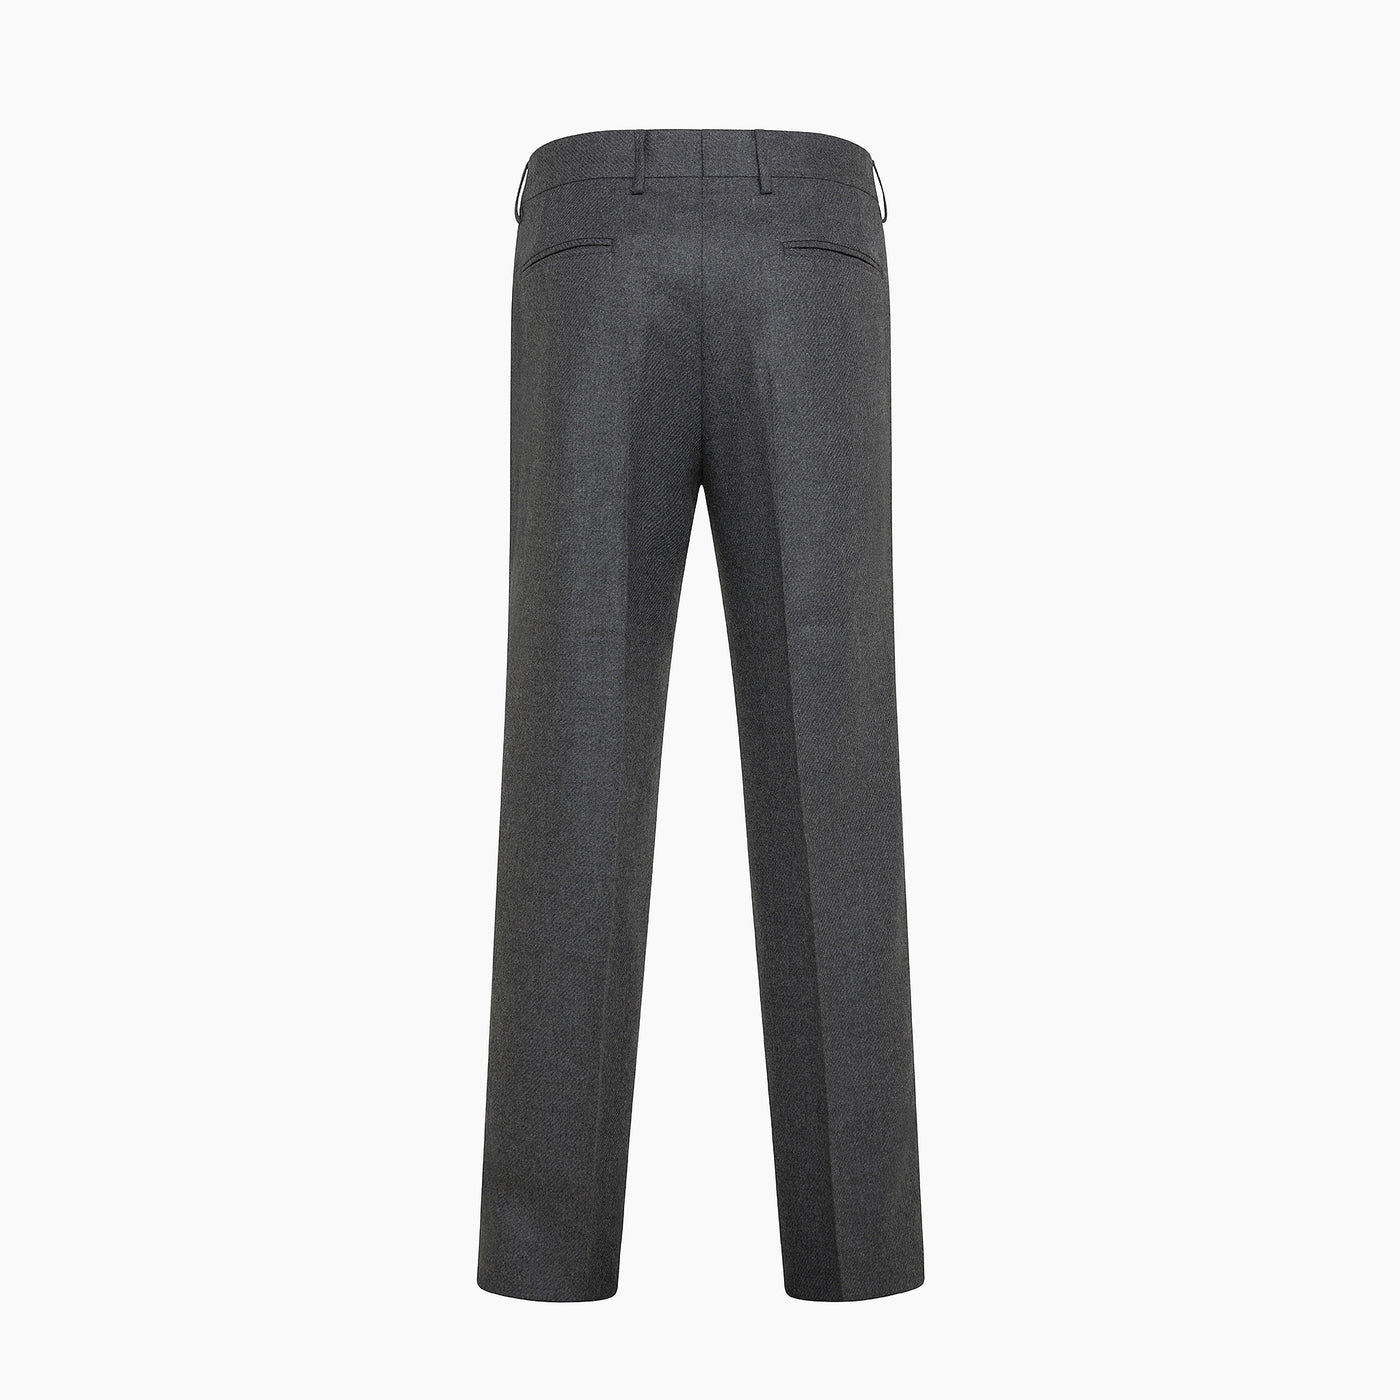 Adone Pleated Chino in Twill Wool Flannel